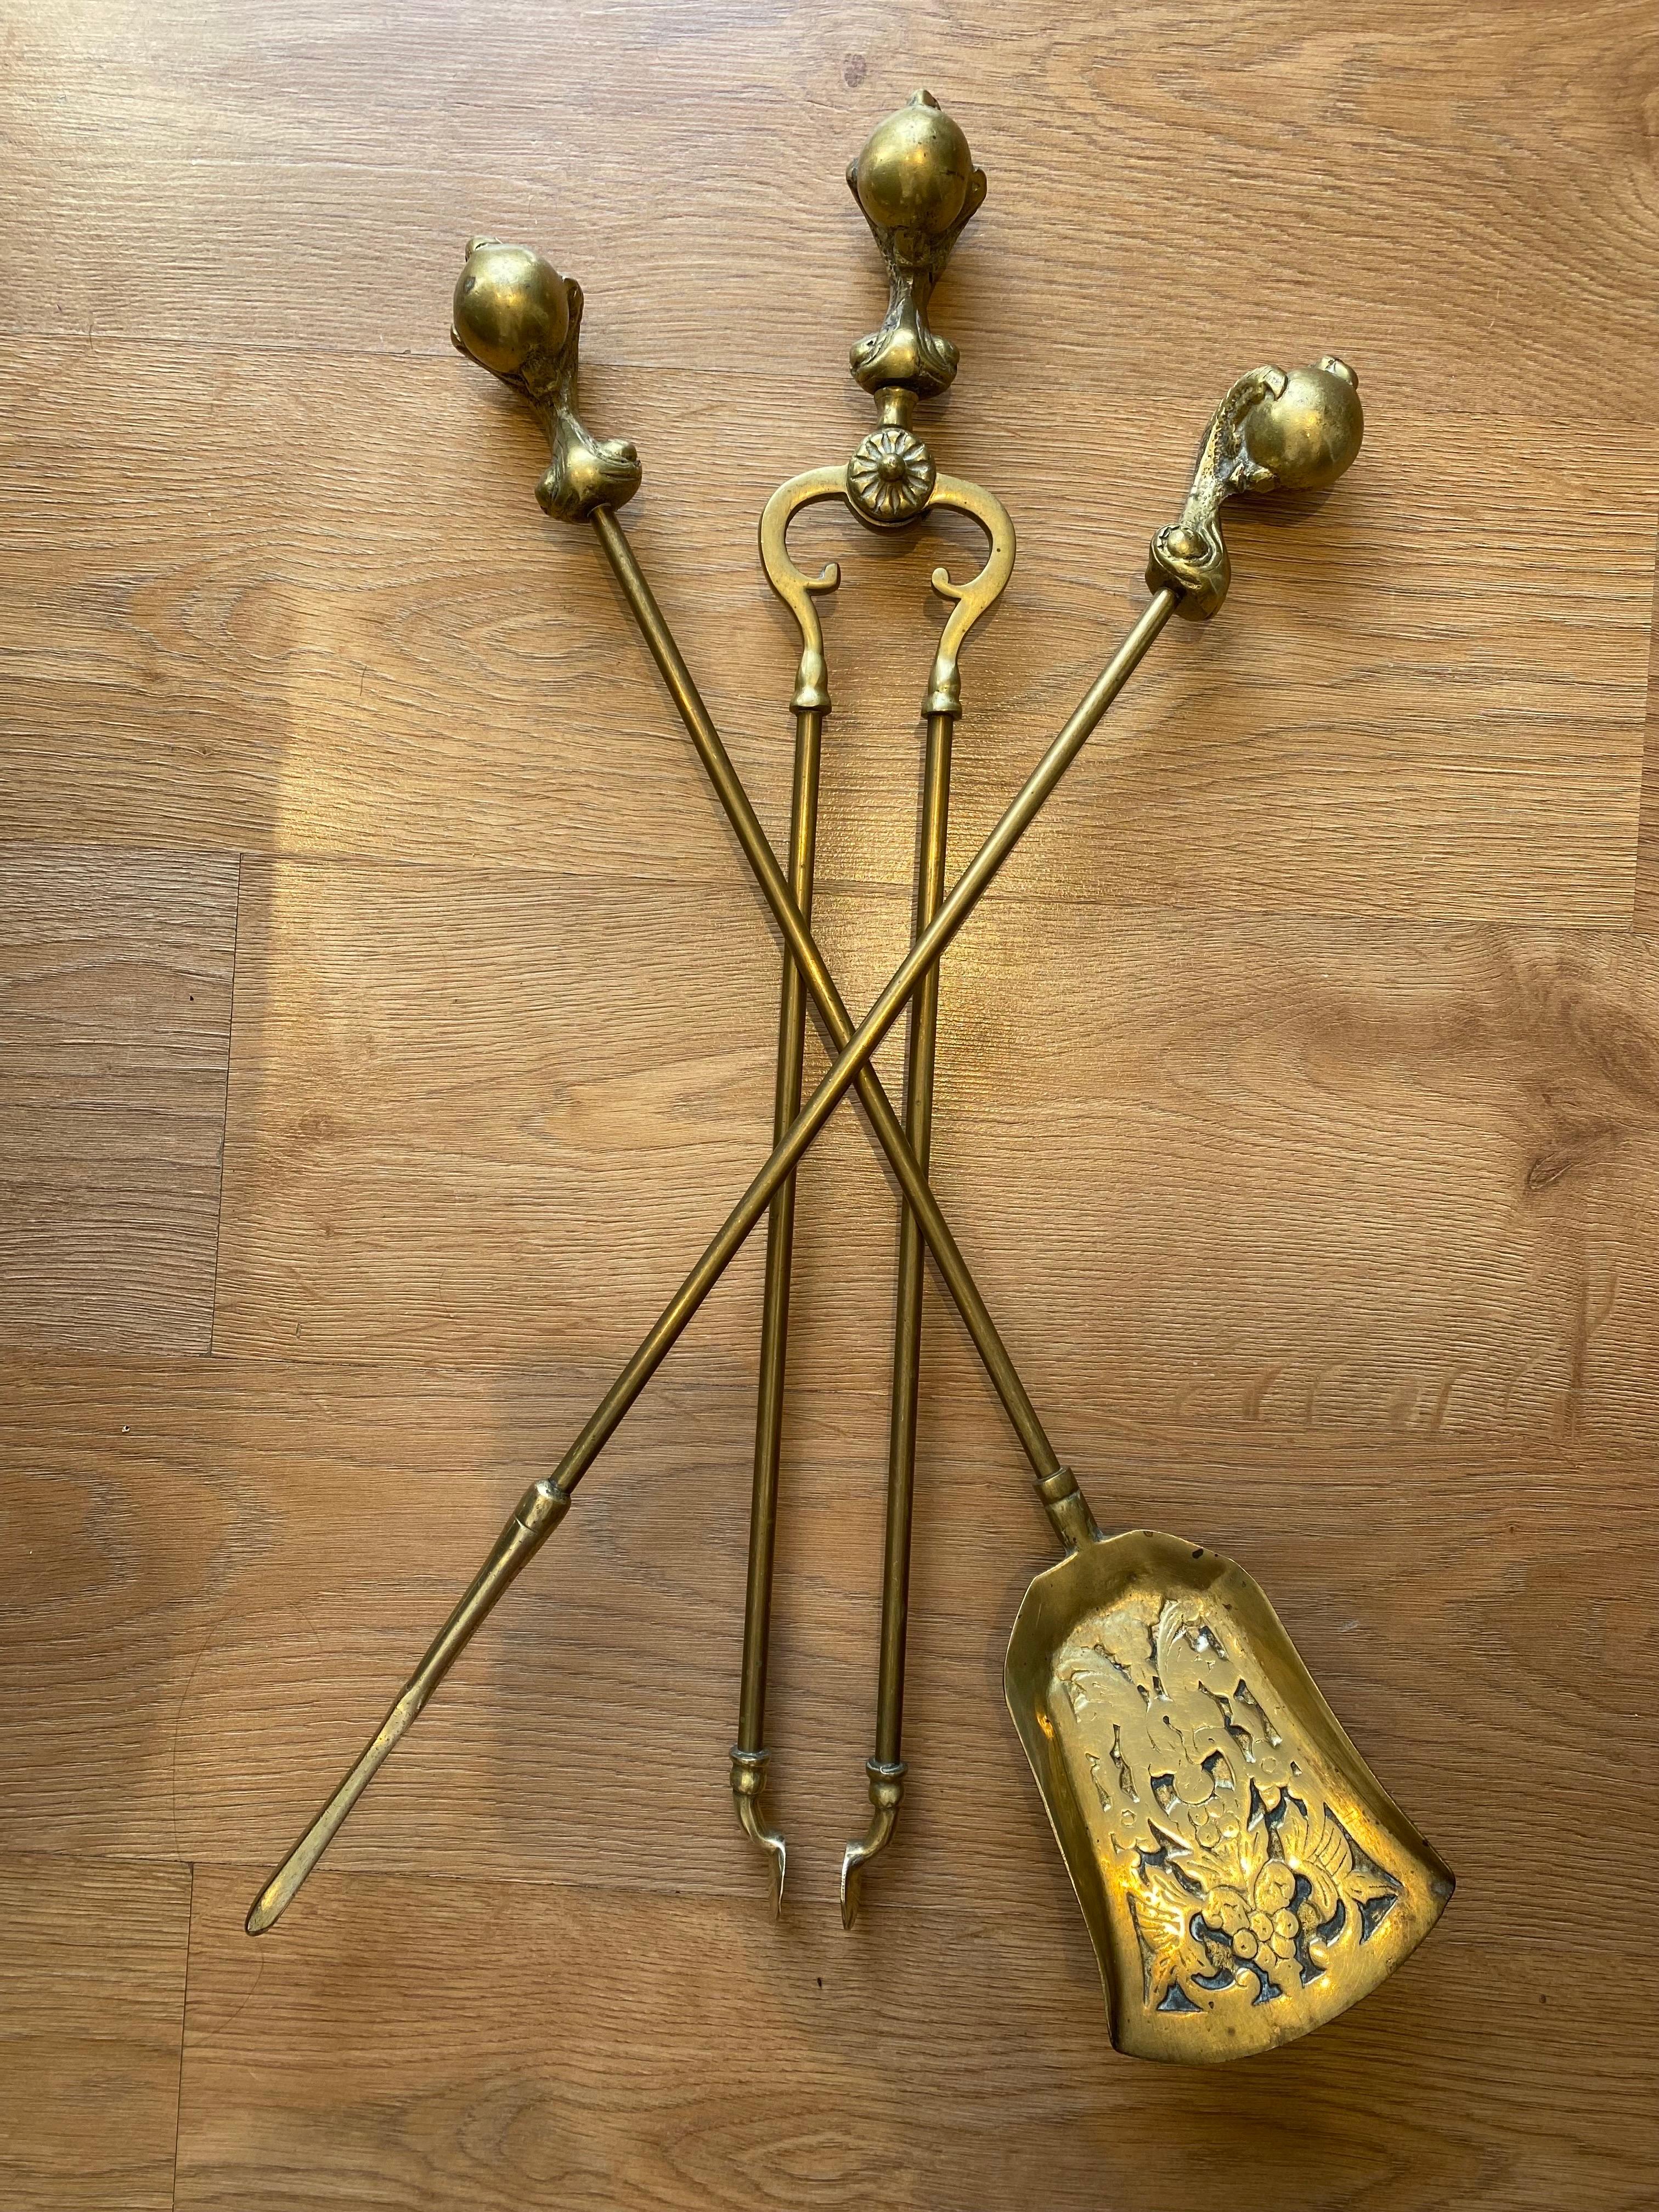 A stunning antique Victorian Gothic brass ball eagle claw fire companion set. The superb set is solid brass, with beautiful ball and eagle claw motif. The spade is engraved with floral design, matching the elegant yet powerful impression the set